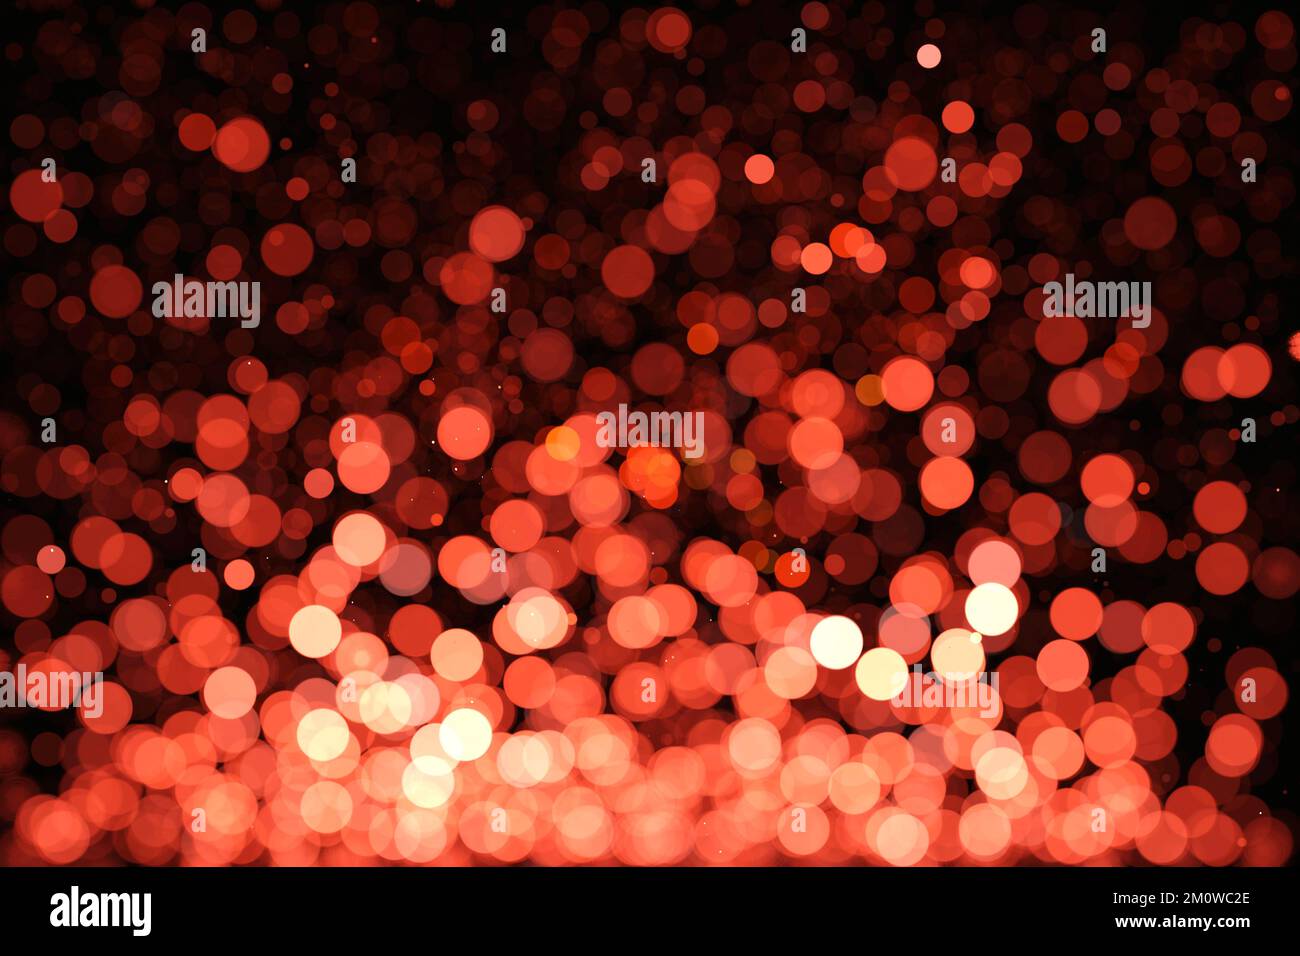 Abstract blurred defocused bokeh lights. Christmas background. Stock Photo